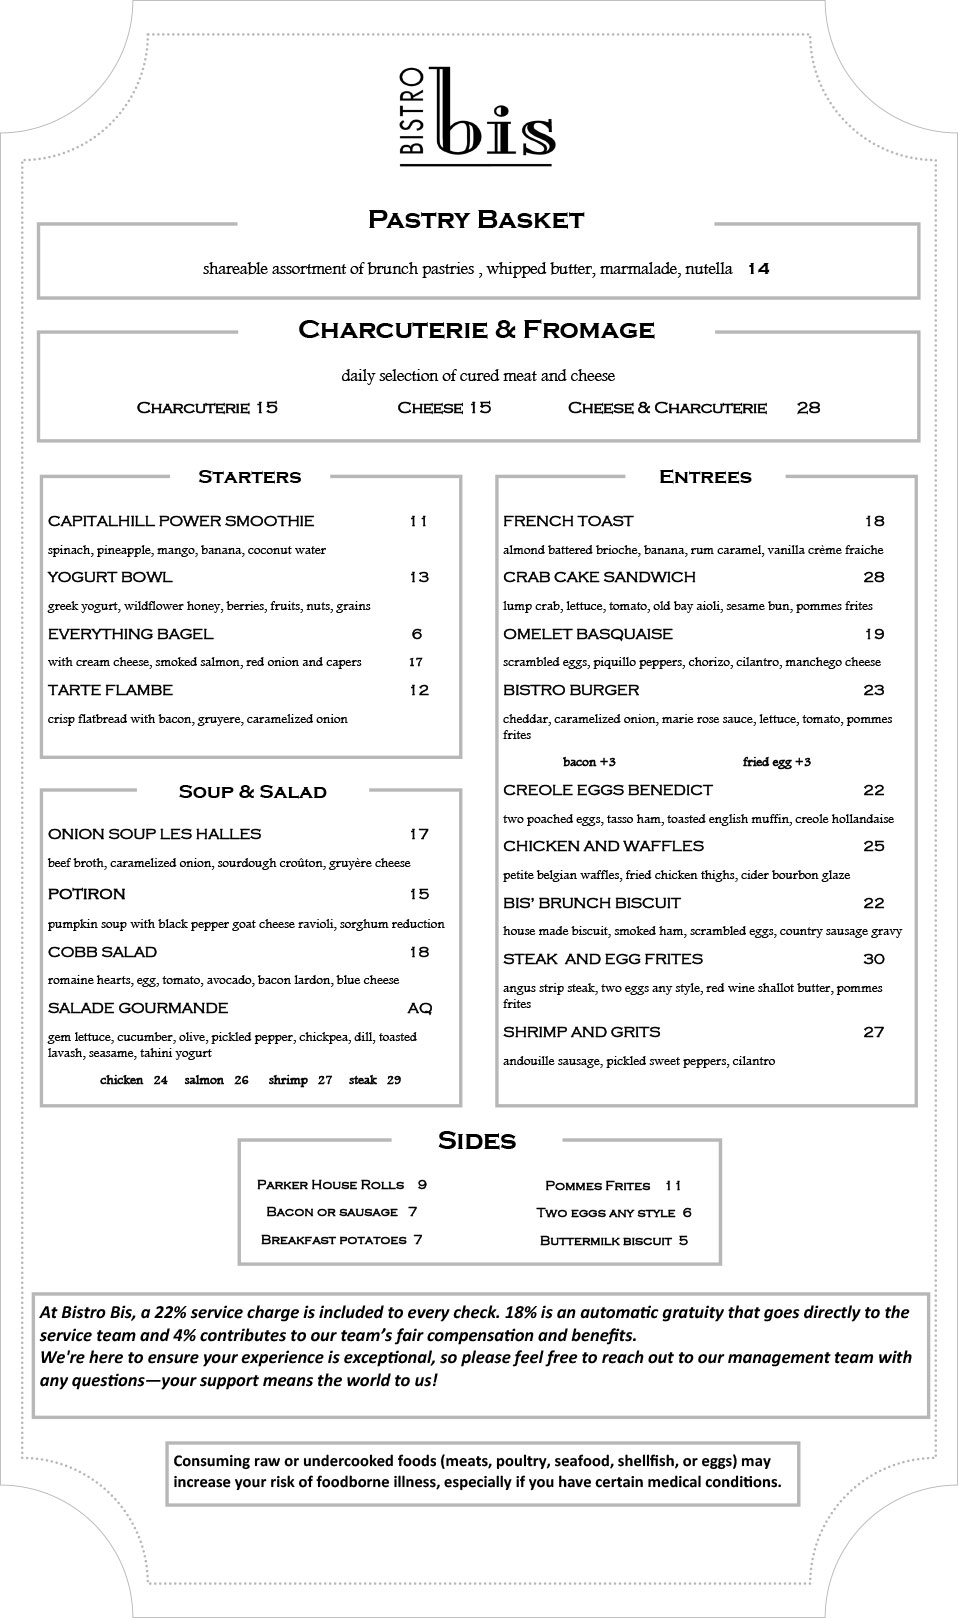 Image of Bistro Bis Brunch menu featuring French cuisine